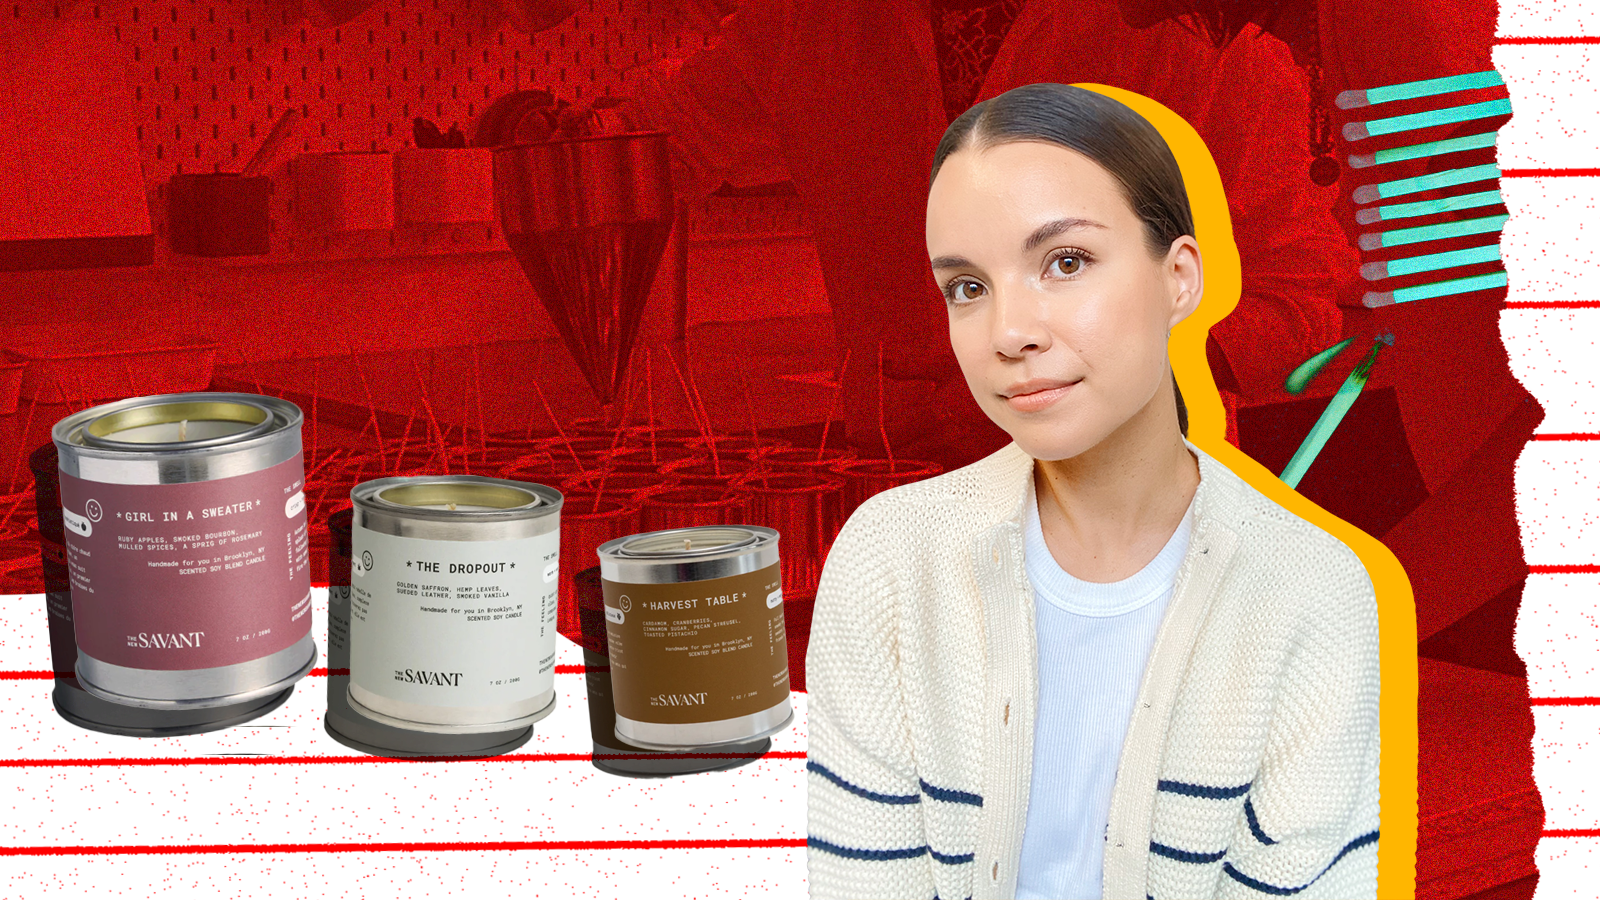 A photocollage featuring Ingrid Nilsen and some of her candles.